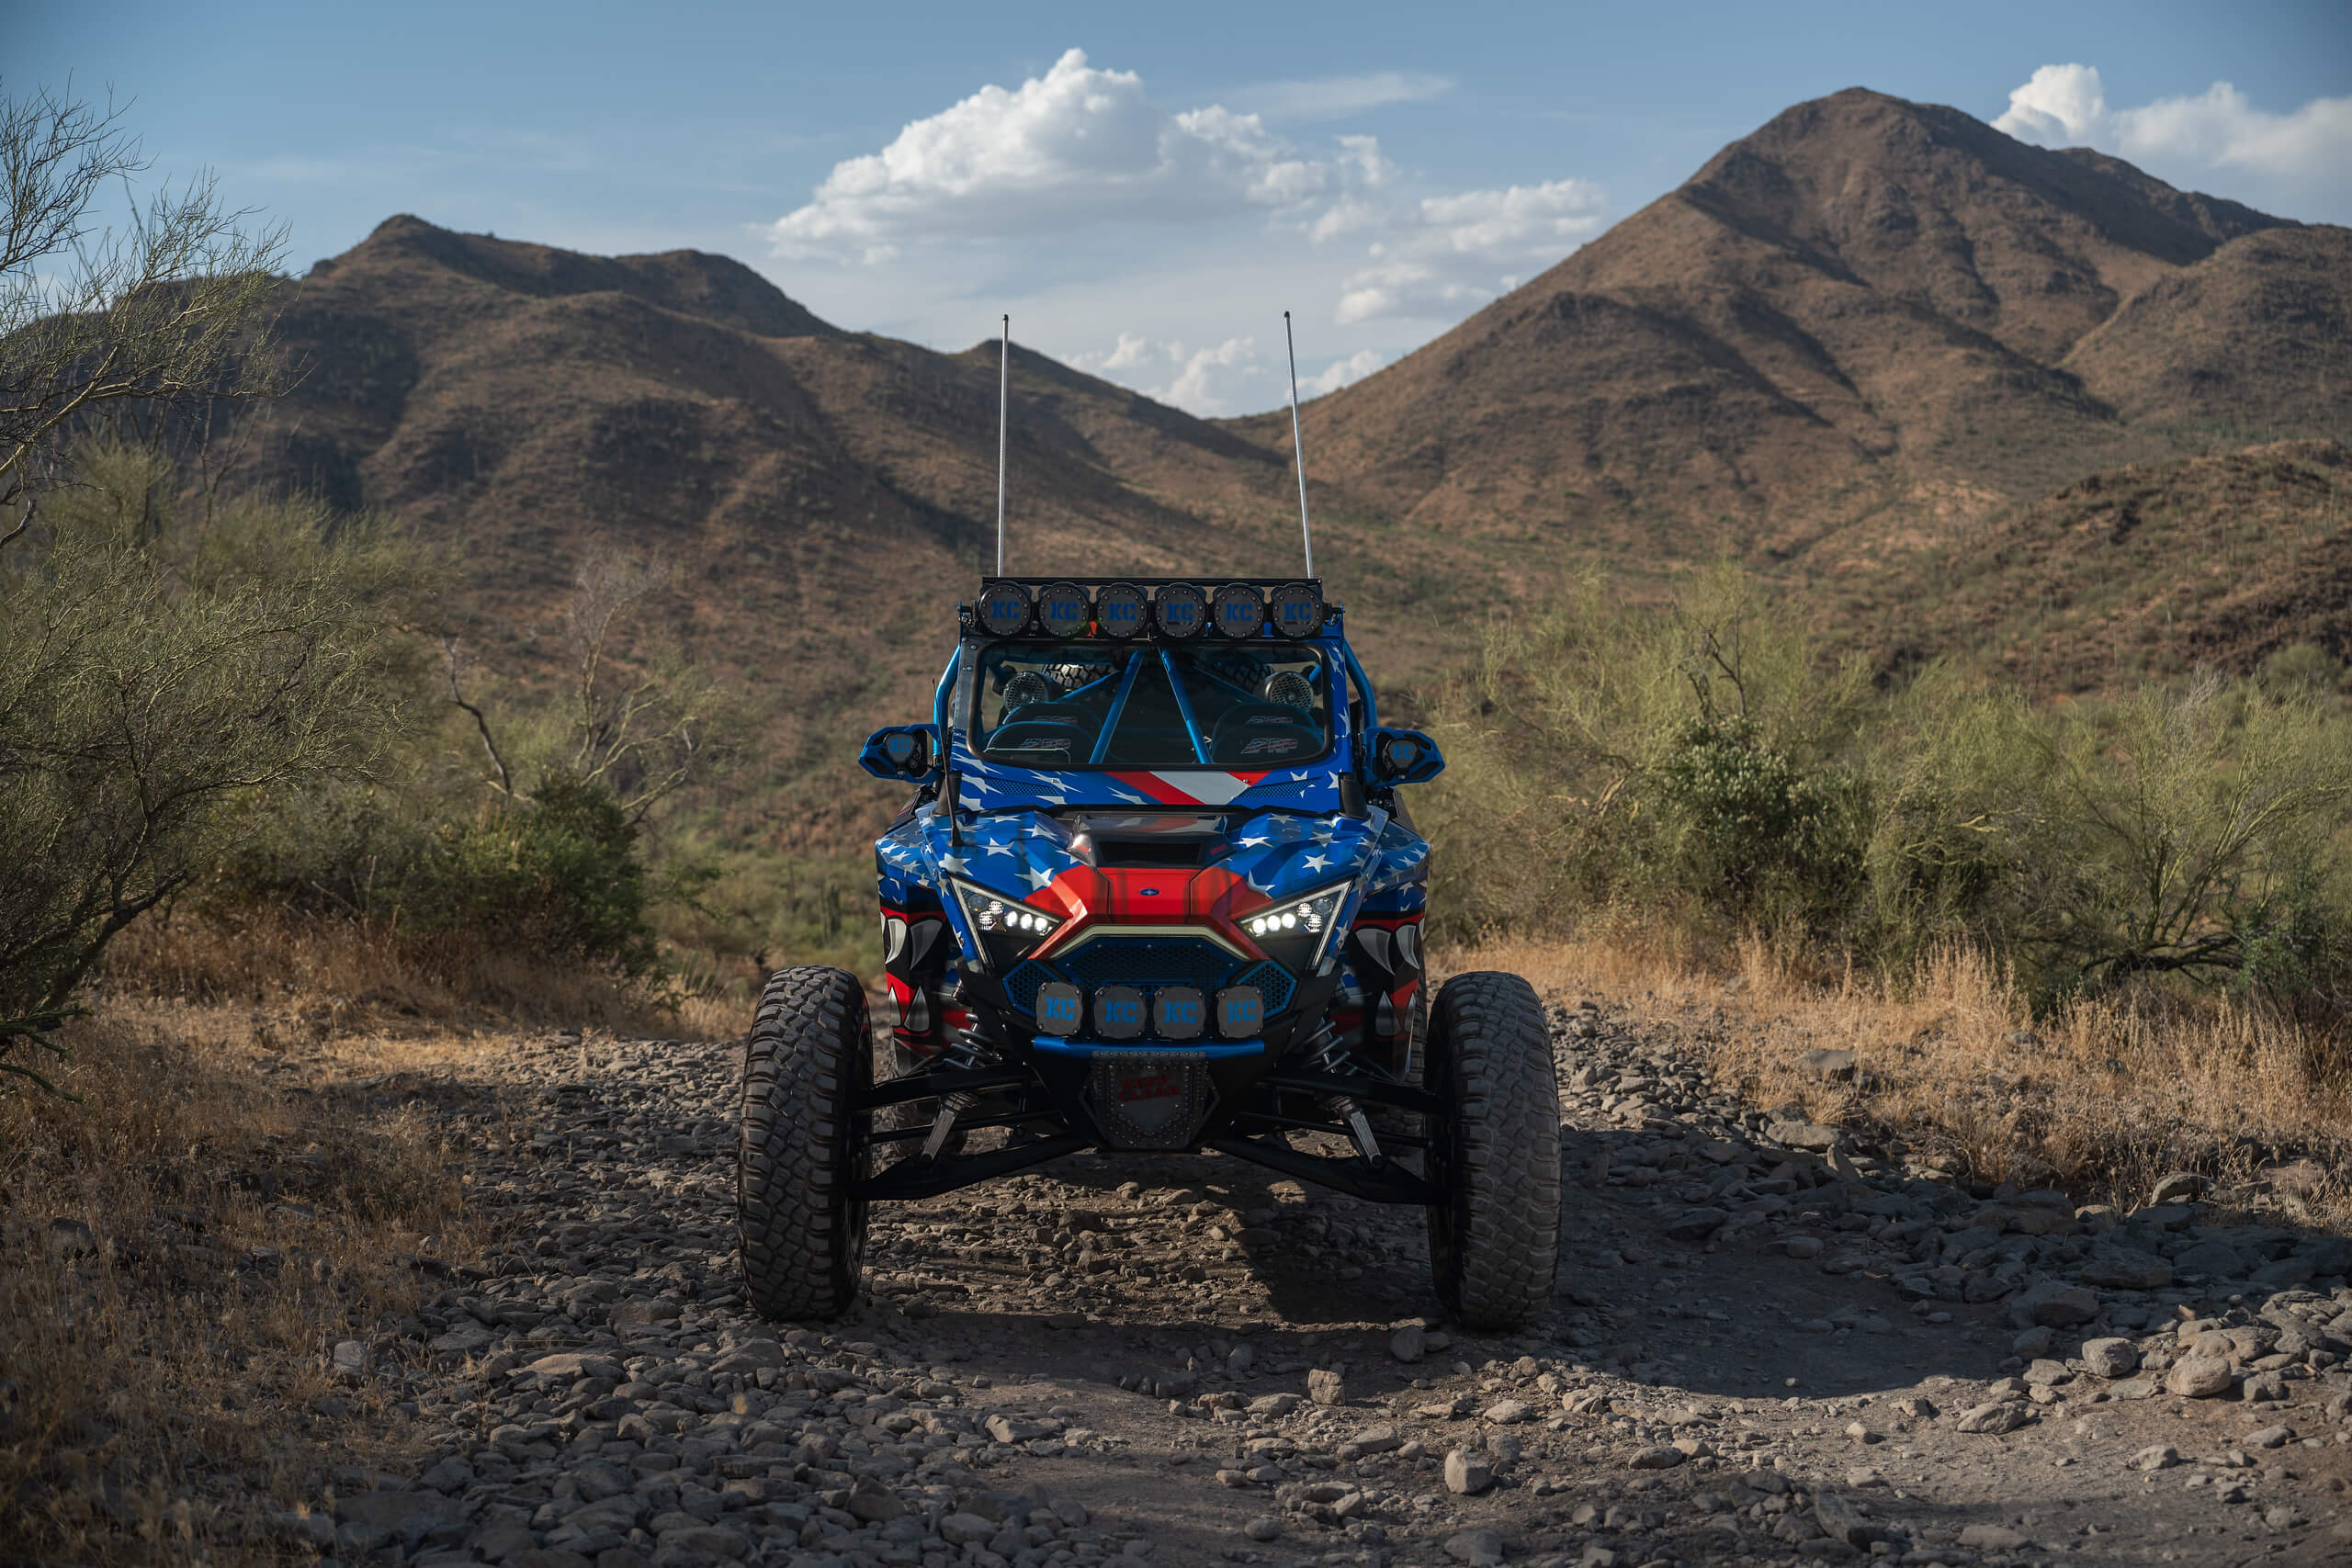 Mike Ericksons Polaris RZR Pro R Custom Build By Jagged X Offroad 11